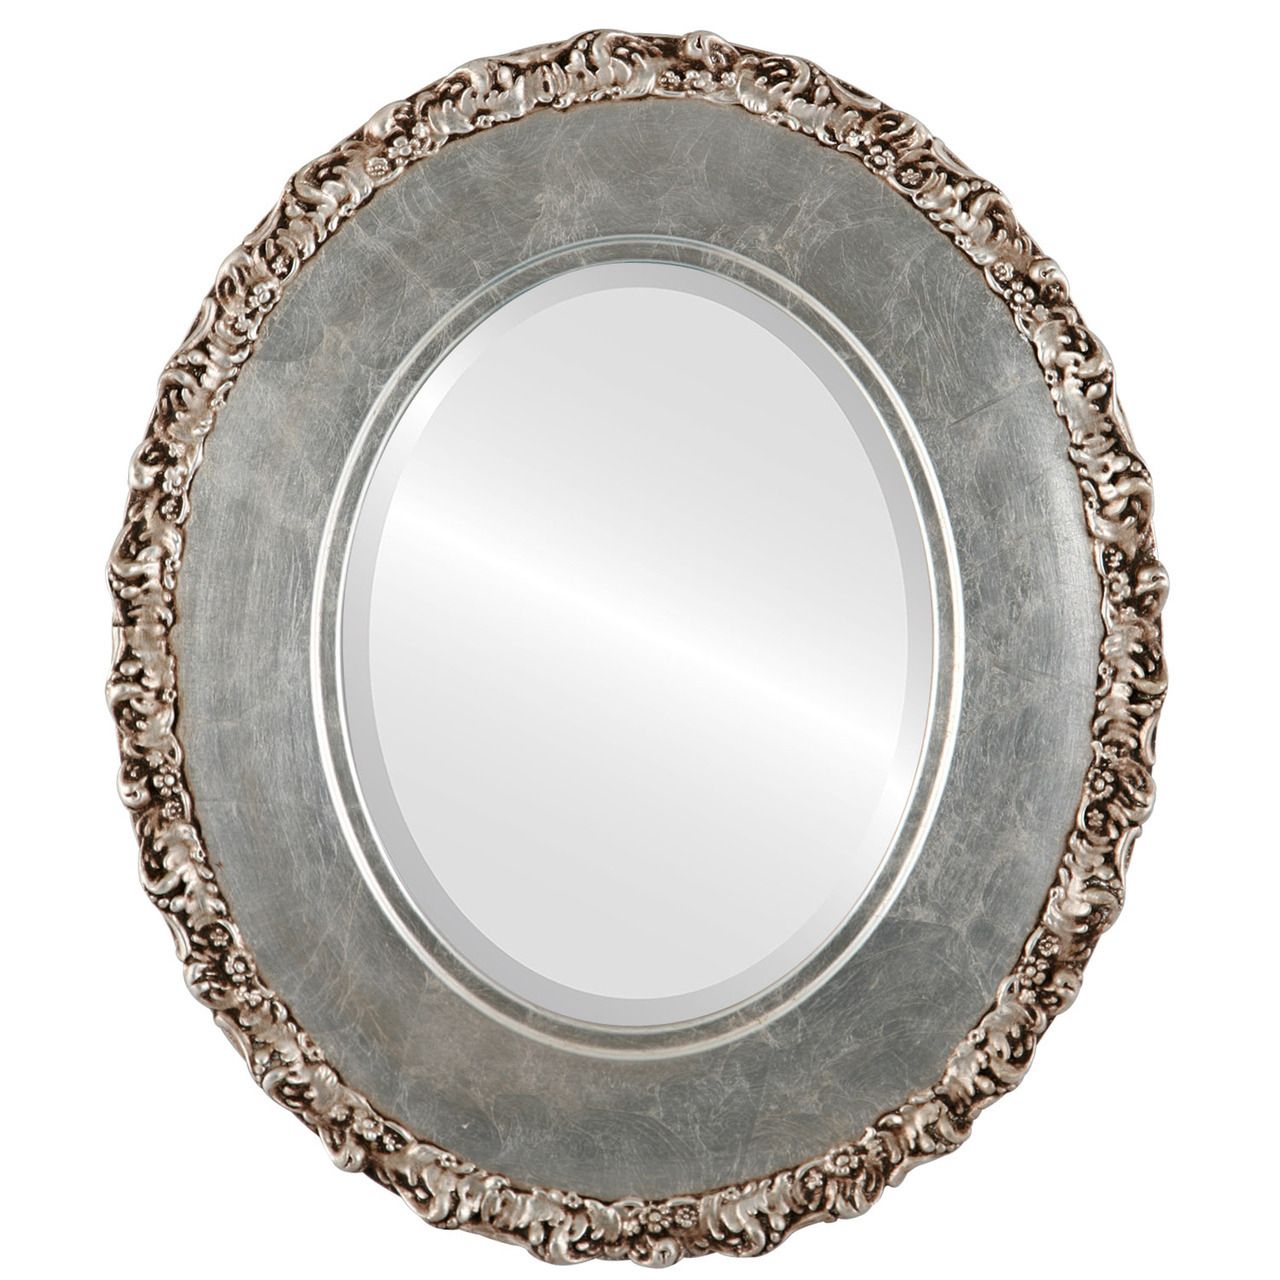 Antique Brown Oval Mirrors From $153 | Free Shipping Throughout Silver Leaf Round Wall Mirrors (View 5 of 15)